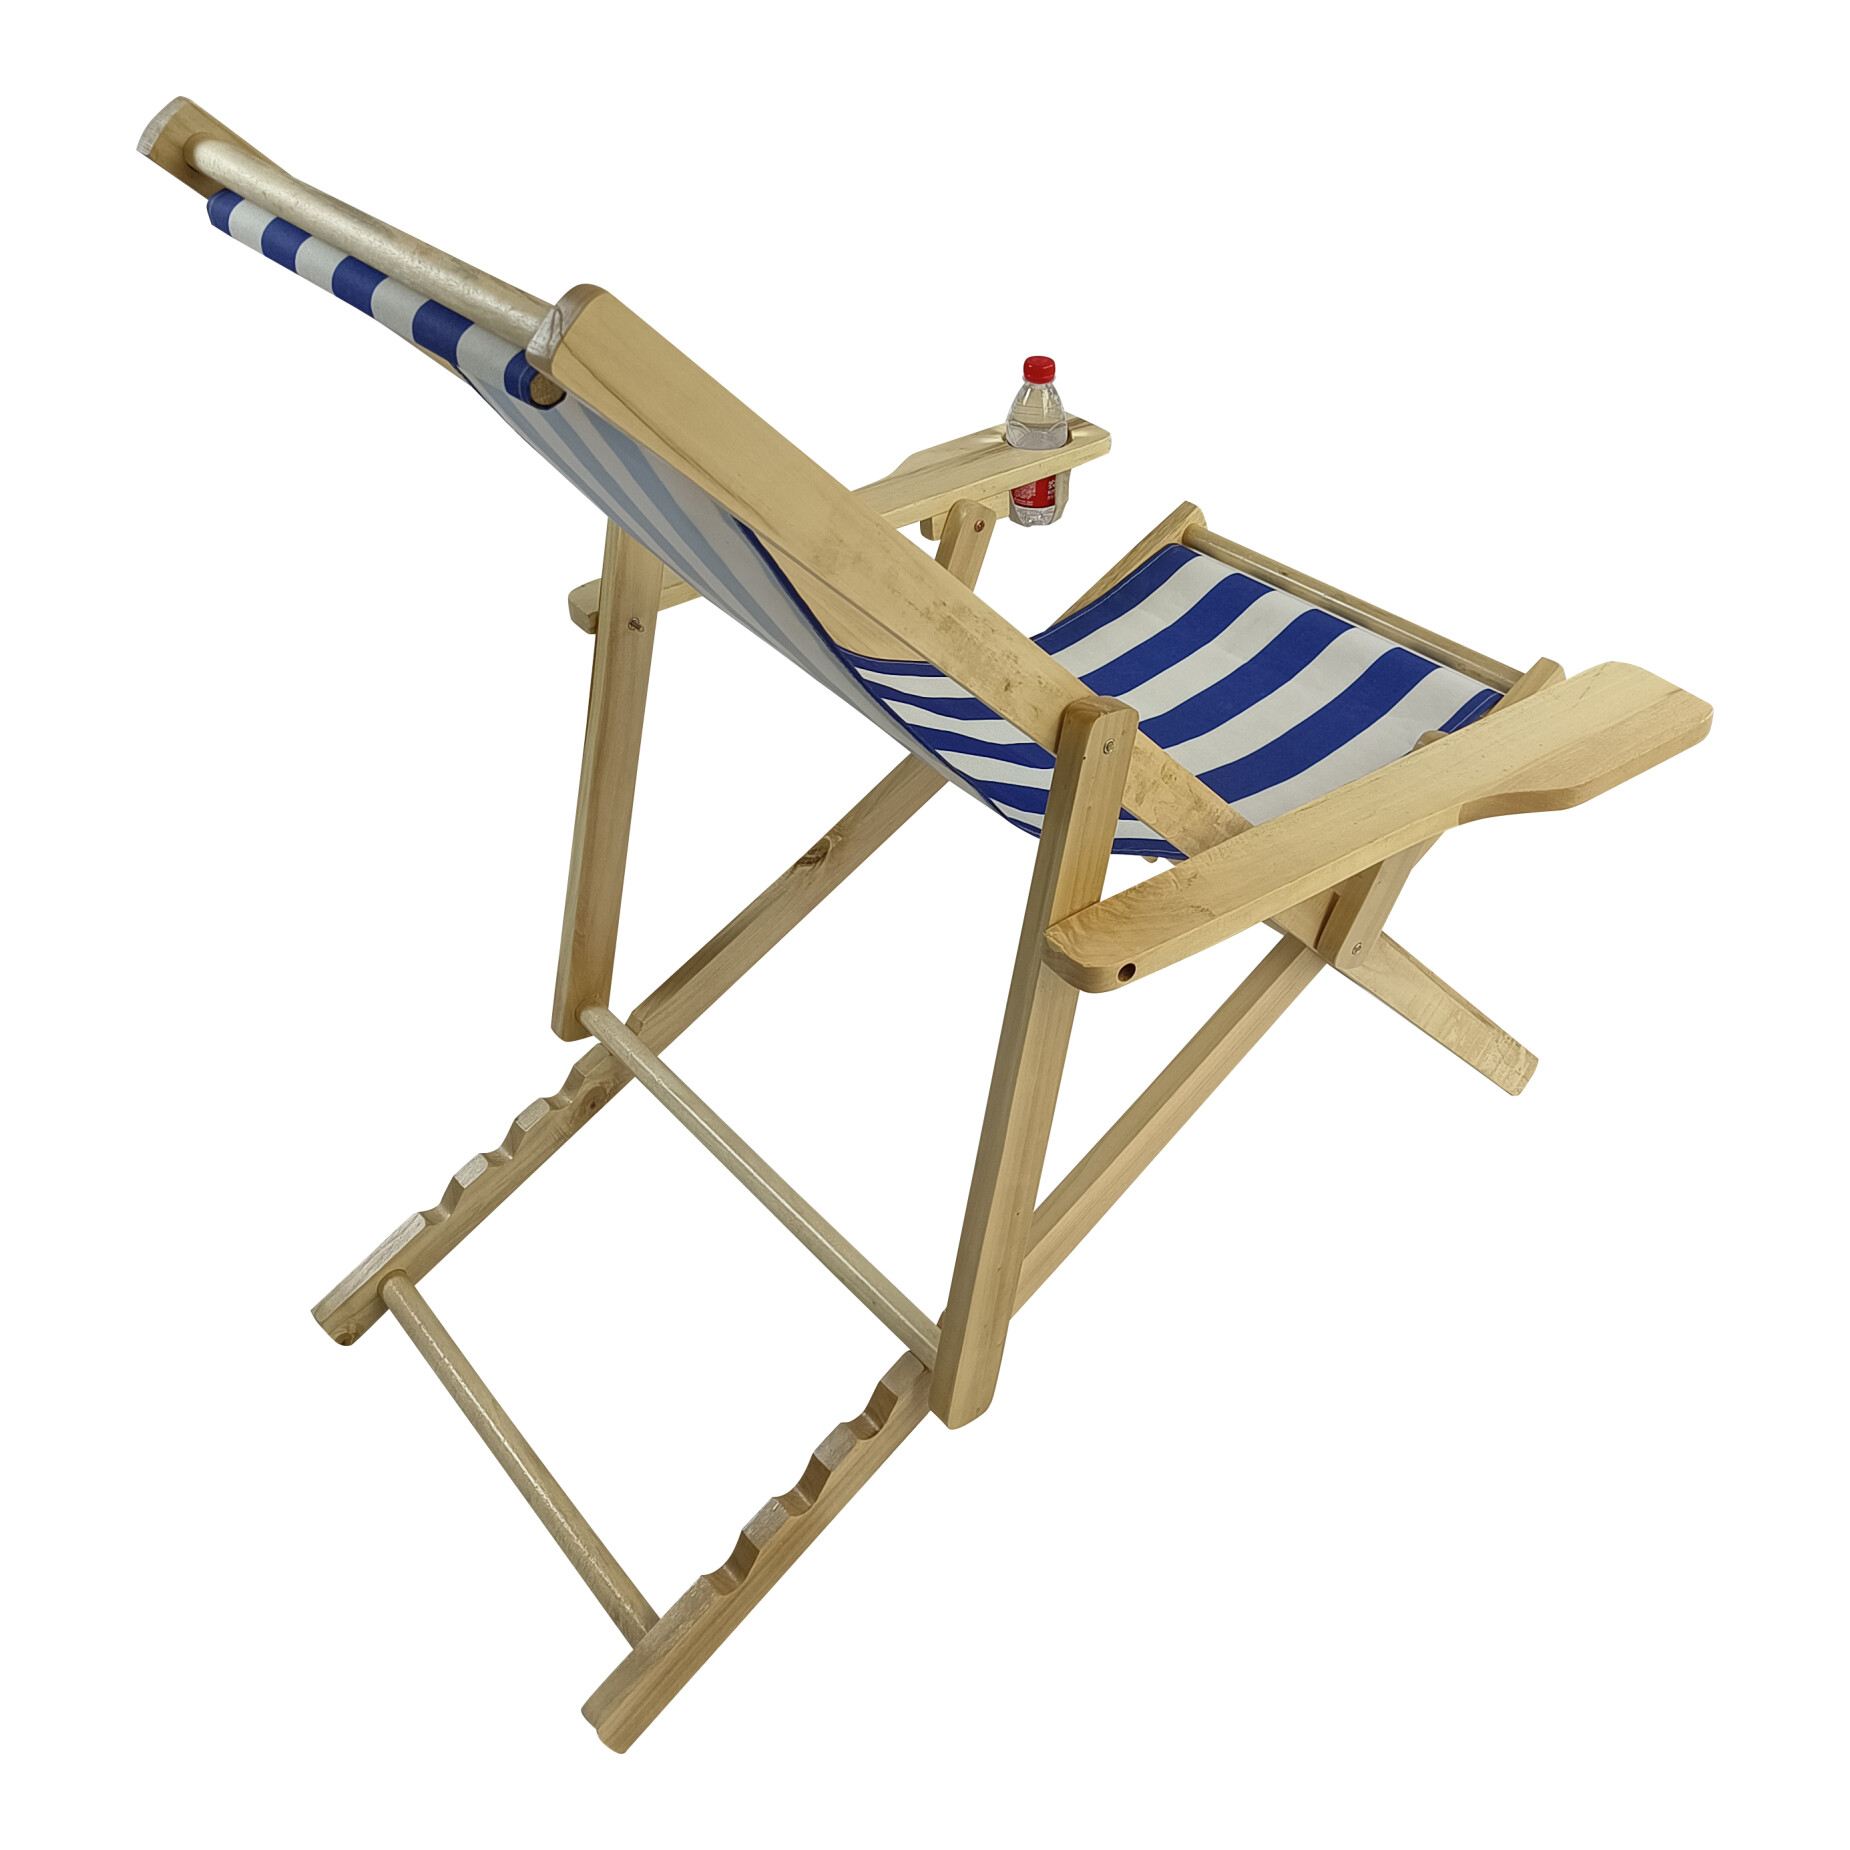 Outdoor Folding Beach Chaise Lounge Chair Camping Recliner, Sling Chair Beach Recliner, Beach Chair with Adjustable Back, Pool Chair Outdoor Chair Garden Chair, Portable Chair - image 4 of 9